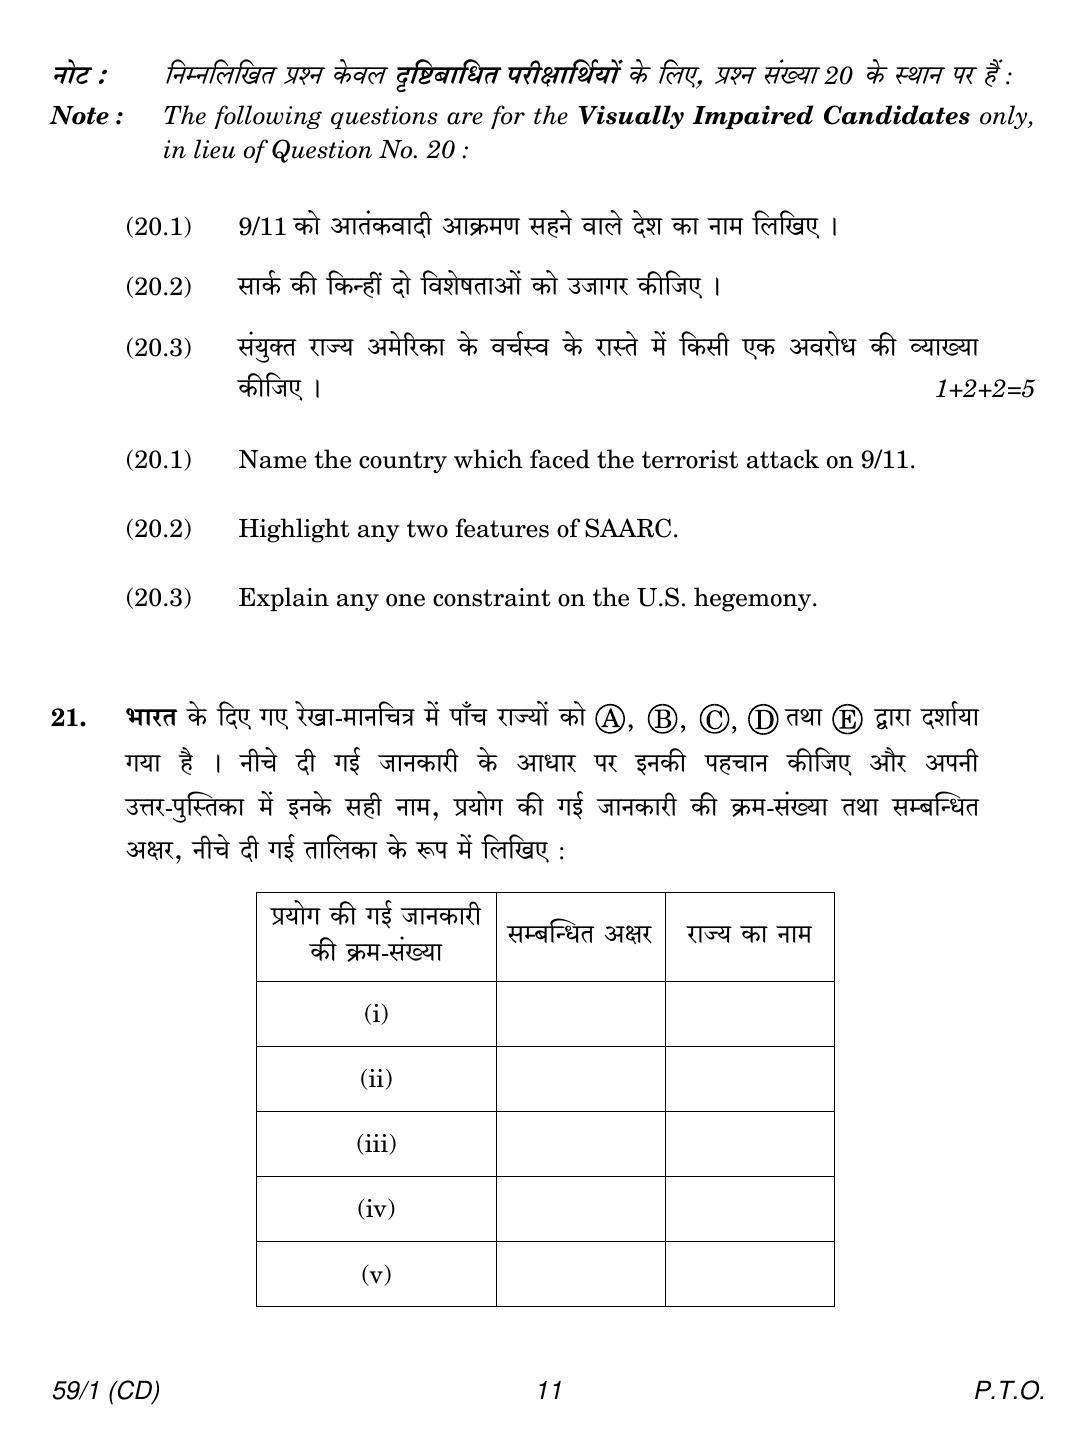 CBSE Class 12 59-1 POLITICAL SCIENCE CD 2018 Question Paper - Page 11